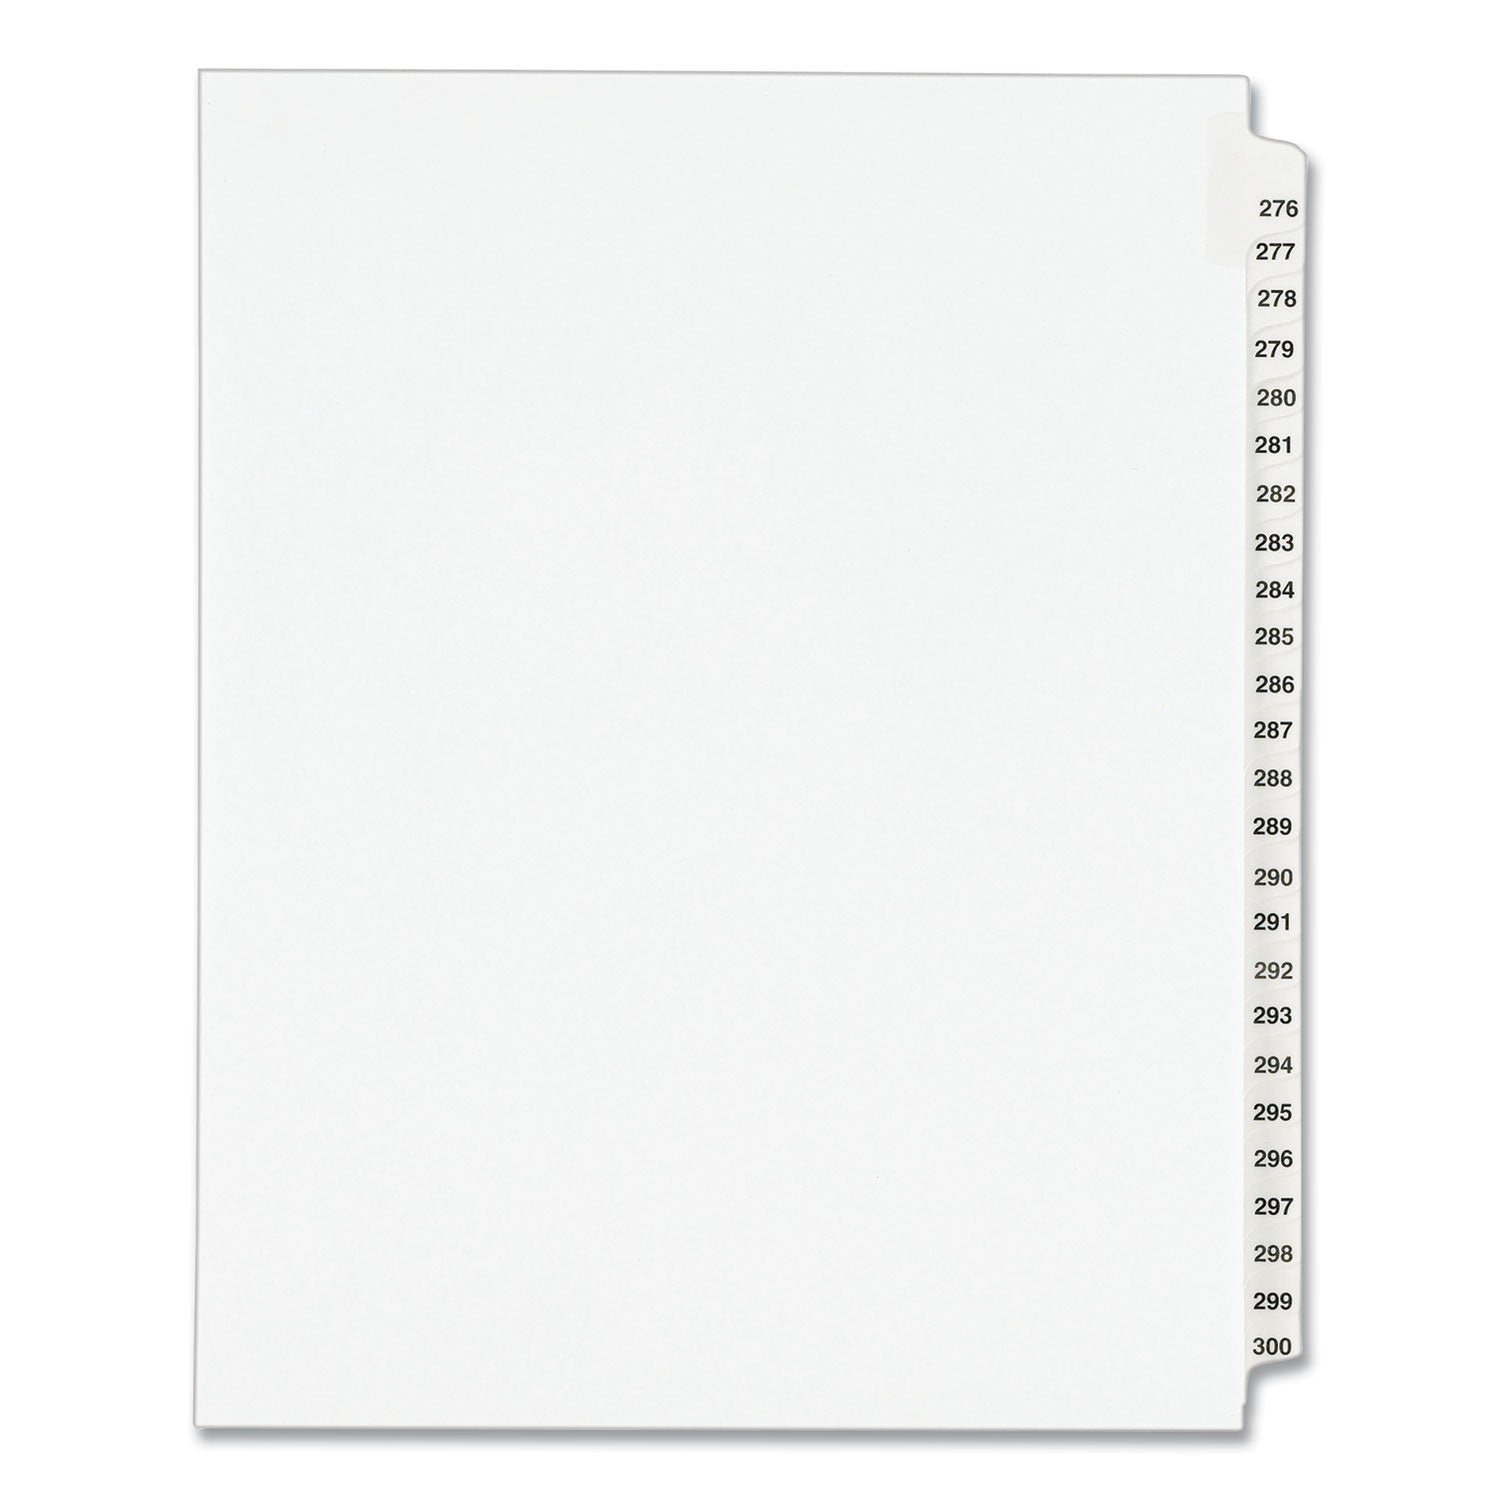 Preprinted Legal Exhibit Side Tab Index Dividers, Avery Style, 25-Tab, 276 to 300, 11 x 8.5, White, 1 Set, (1341) - 